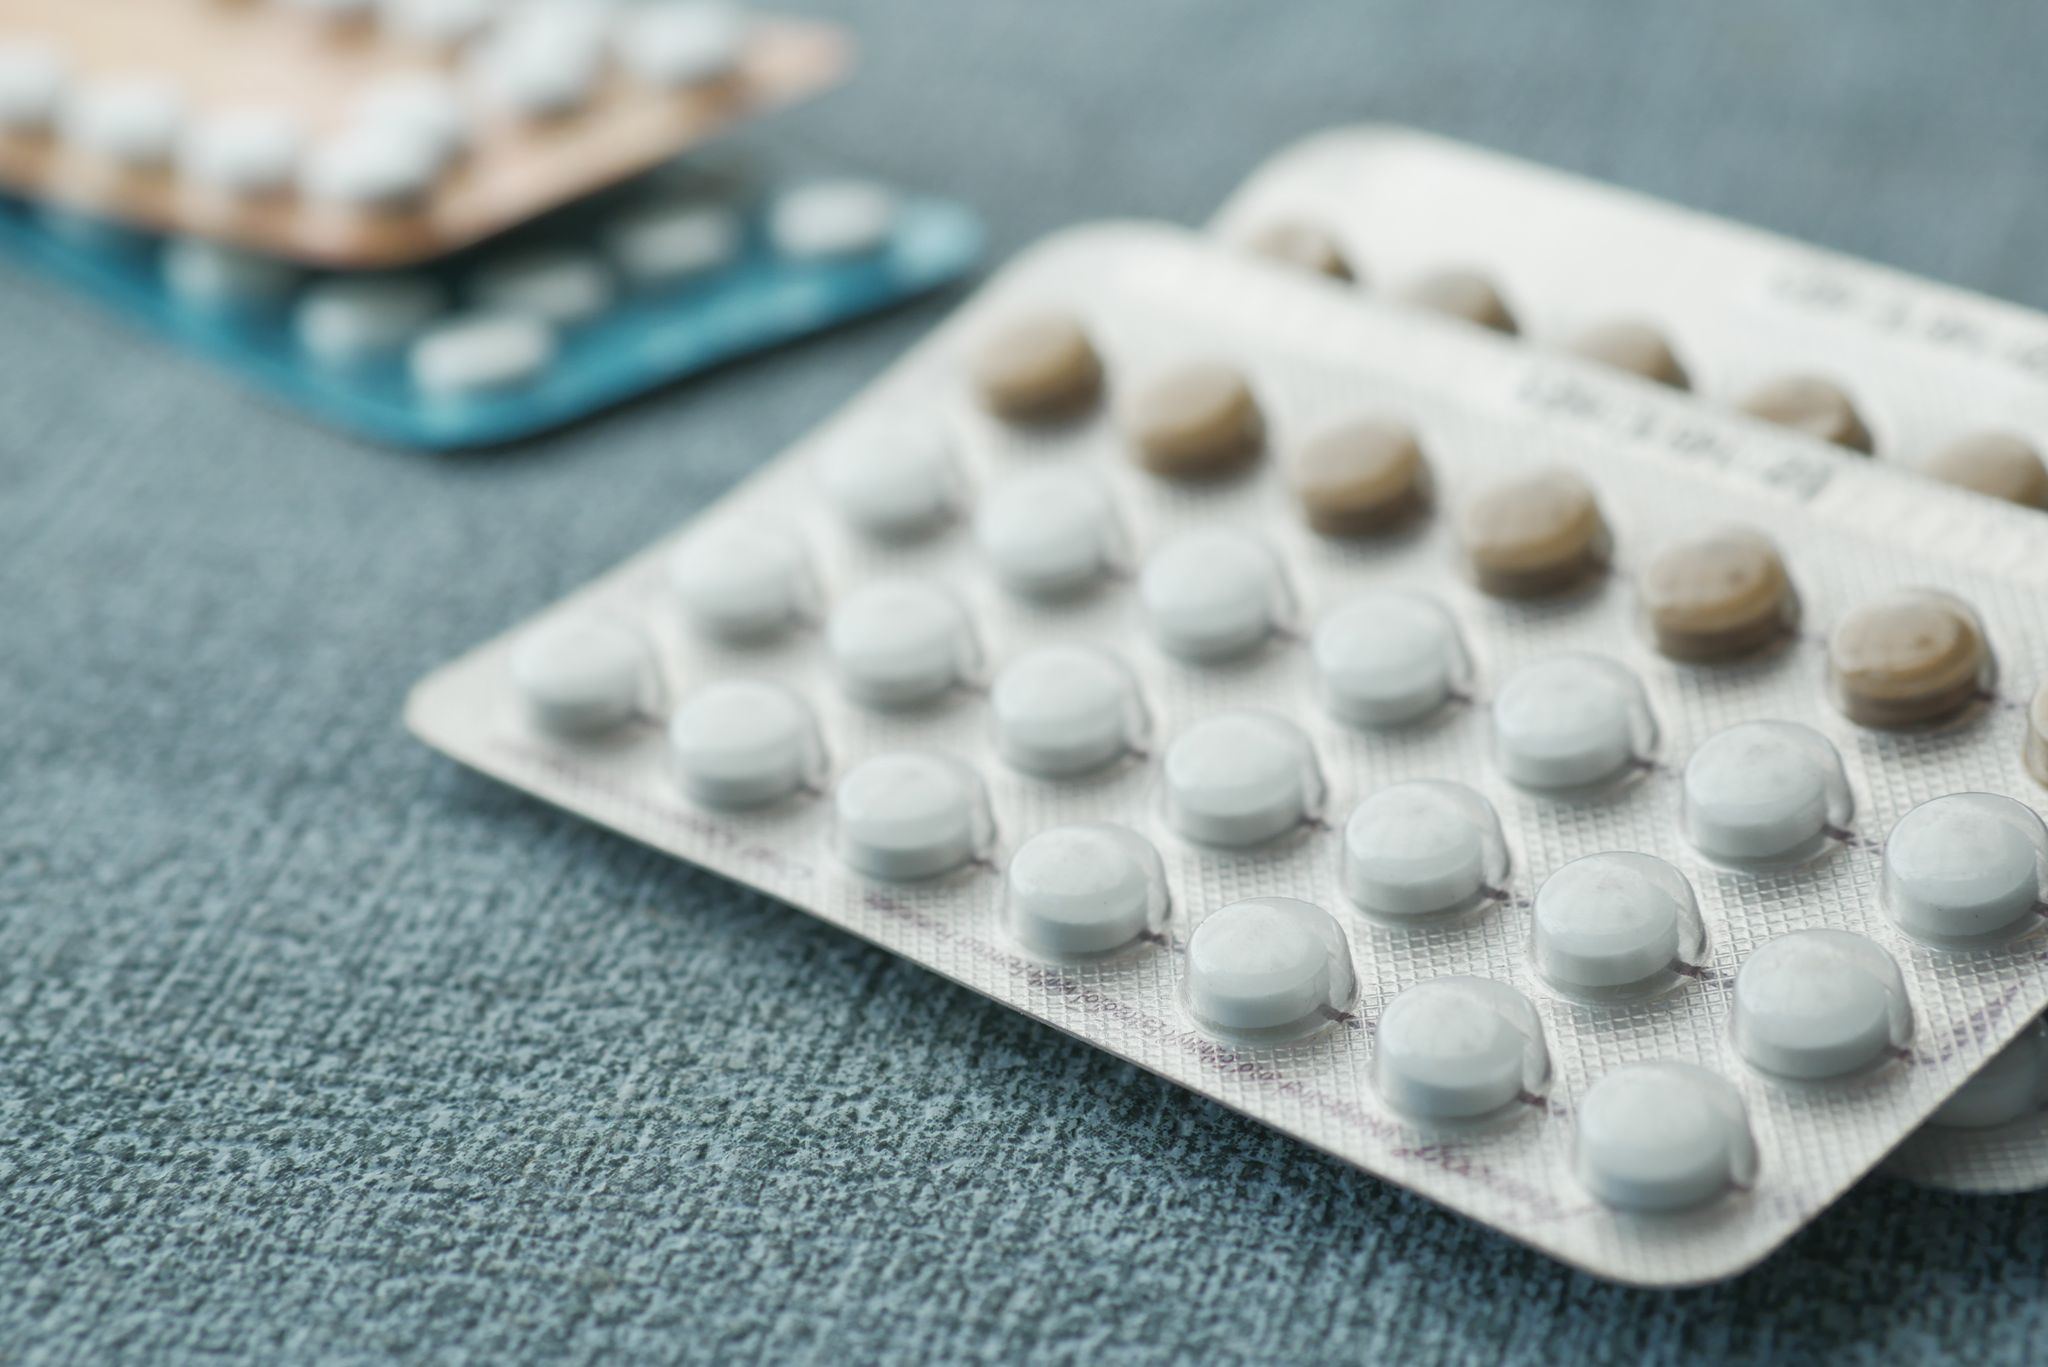 birth control pills and how effective they are